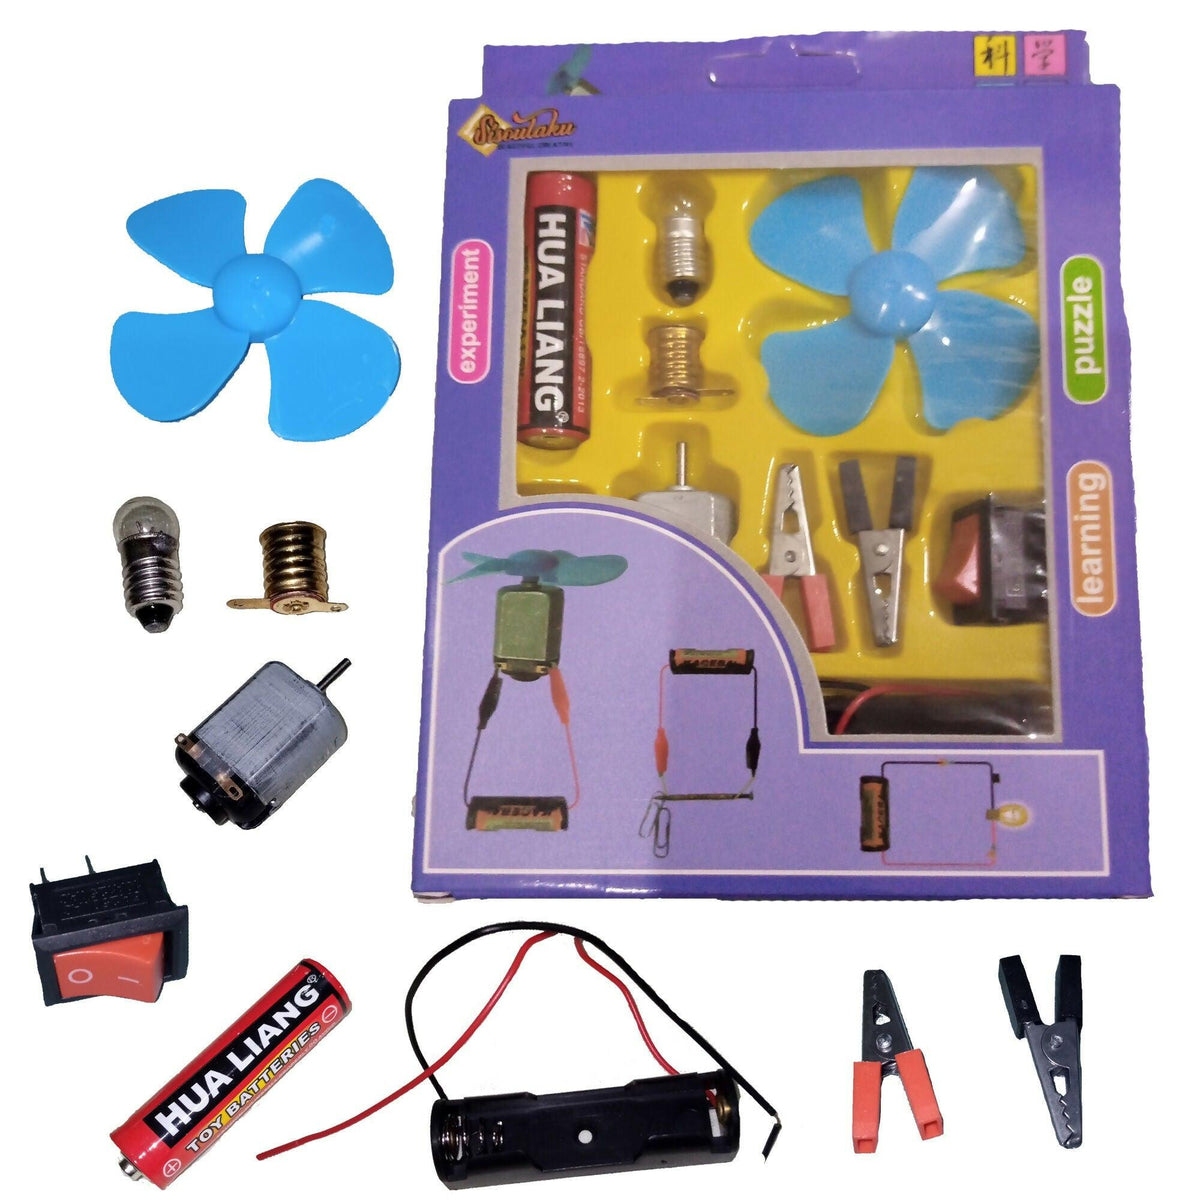 Electronic Science Project Kit for Kids Interesting Project for kids, dr Light Control Fan Circuit Science Diy Kit Educational (Big) - ValueBox